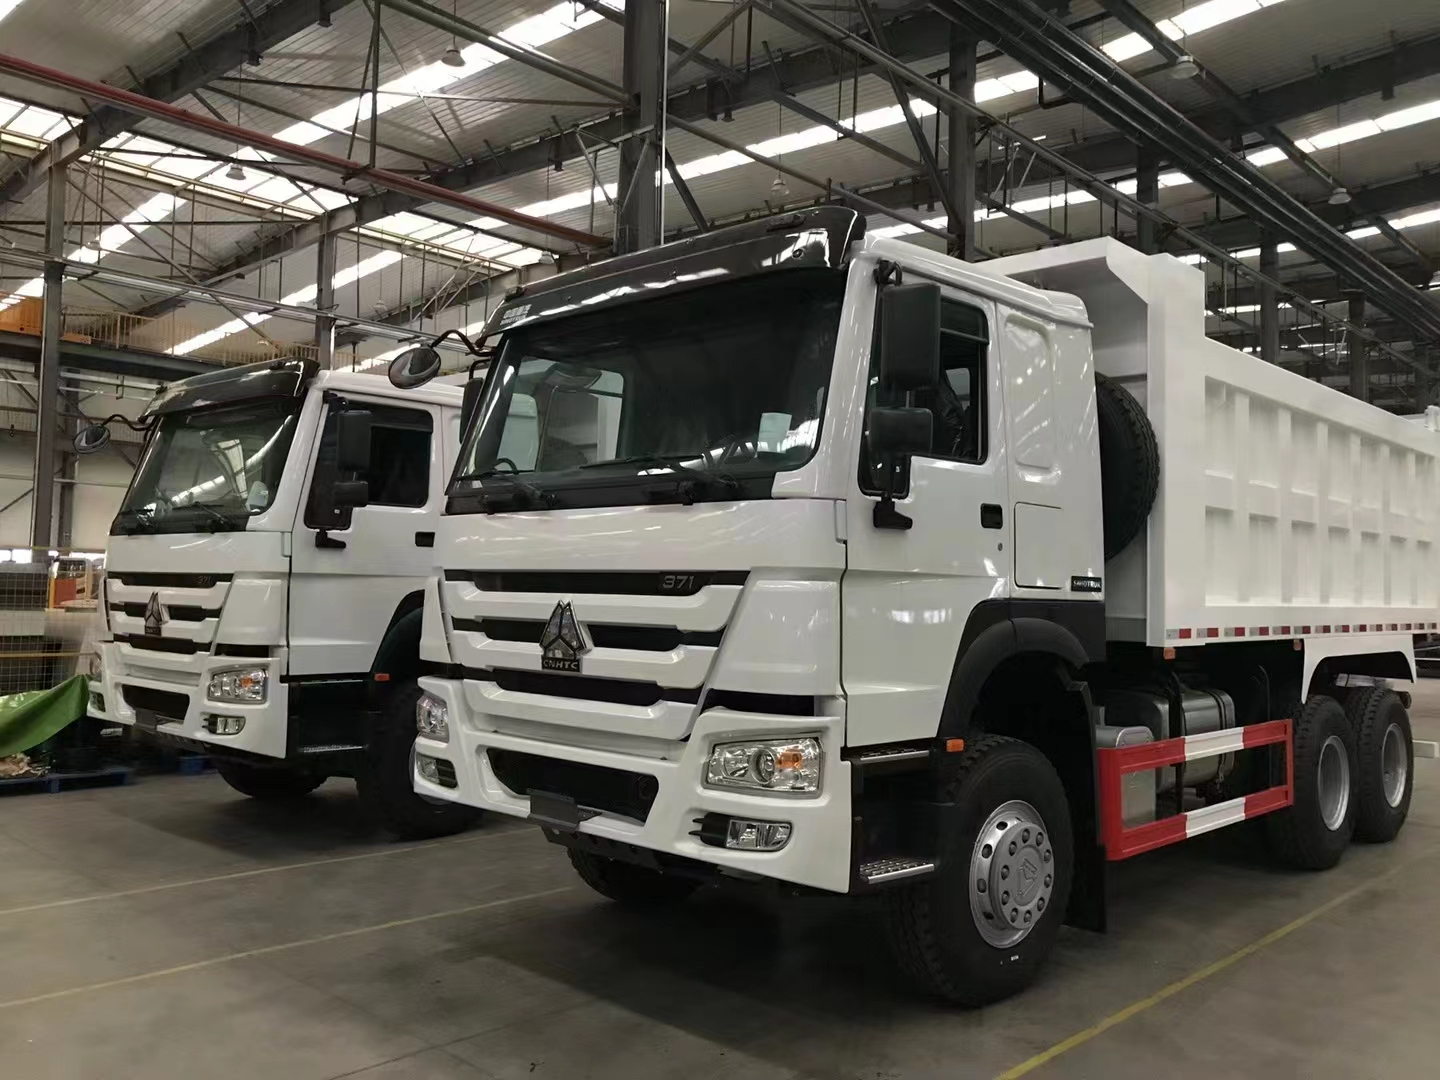 SINOTRUK HOWO 6*4 DUMP TRUCK ARE READY FOR DELIVERY